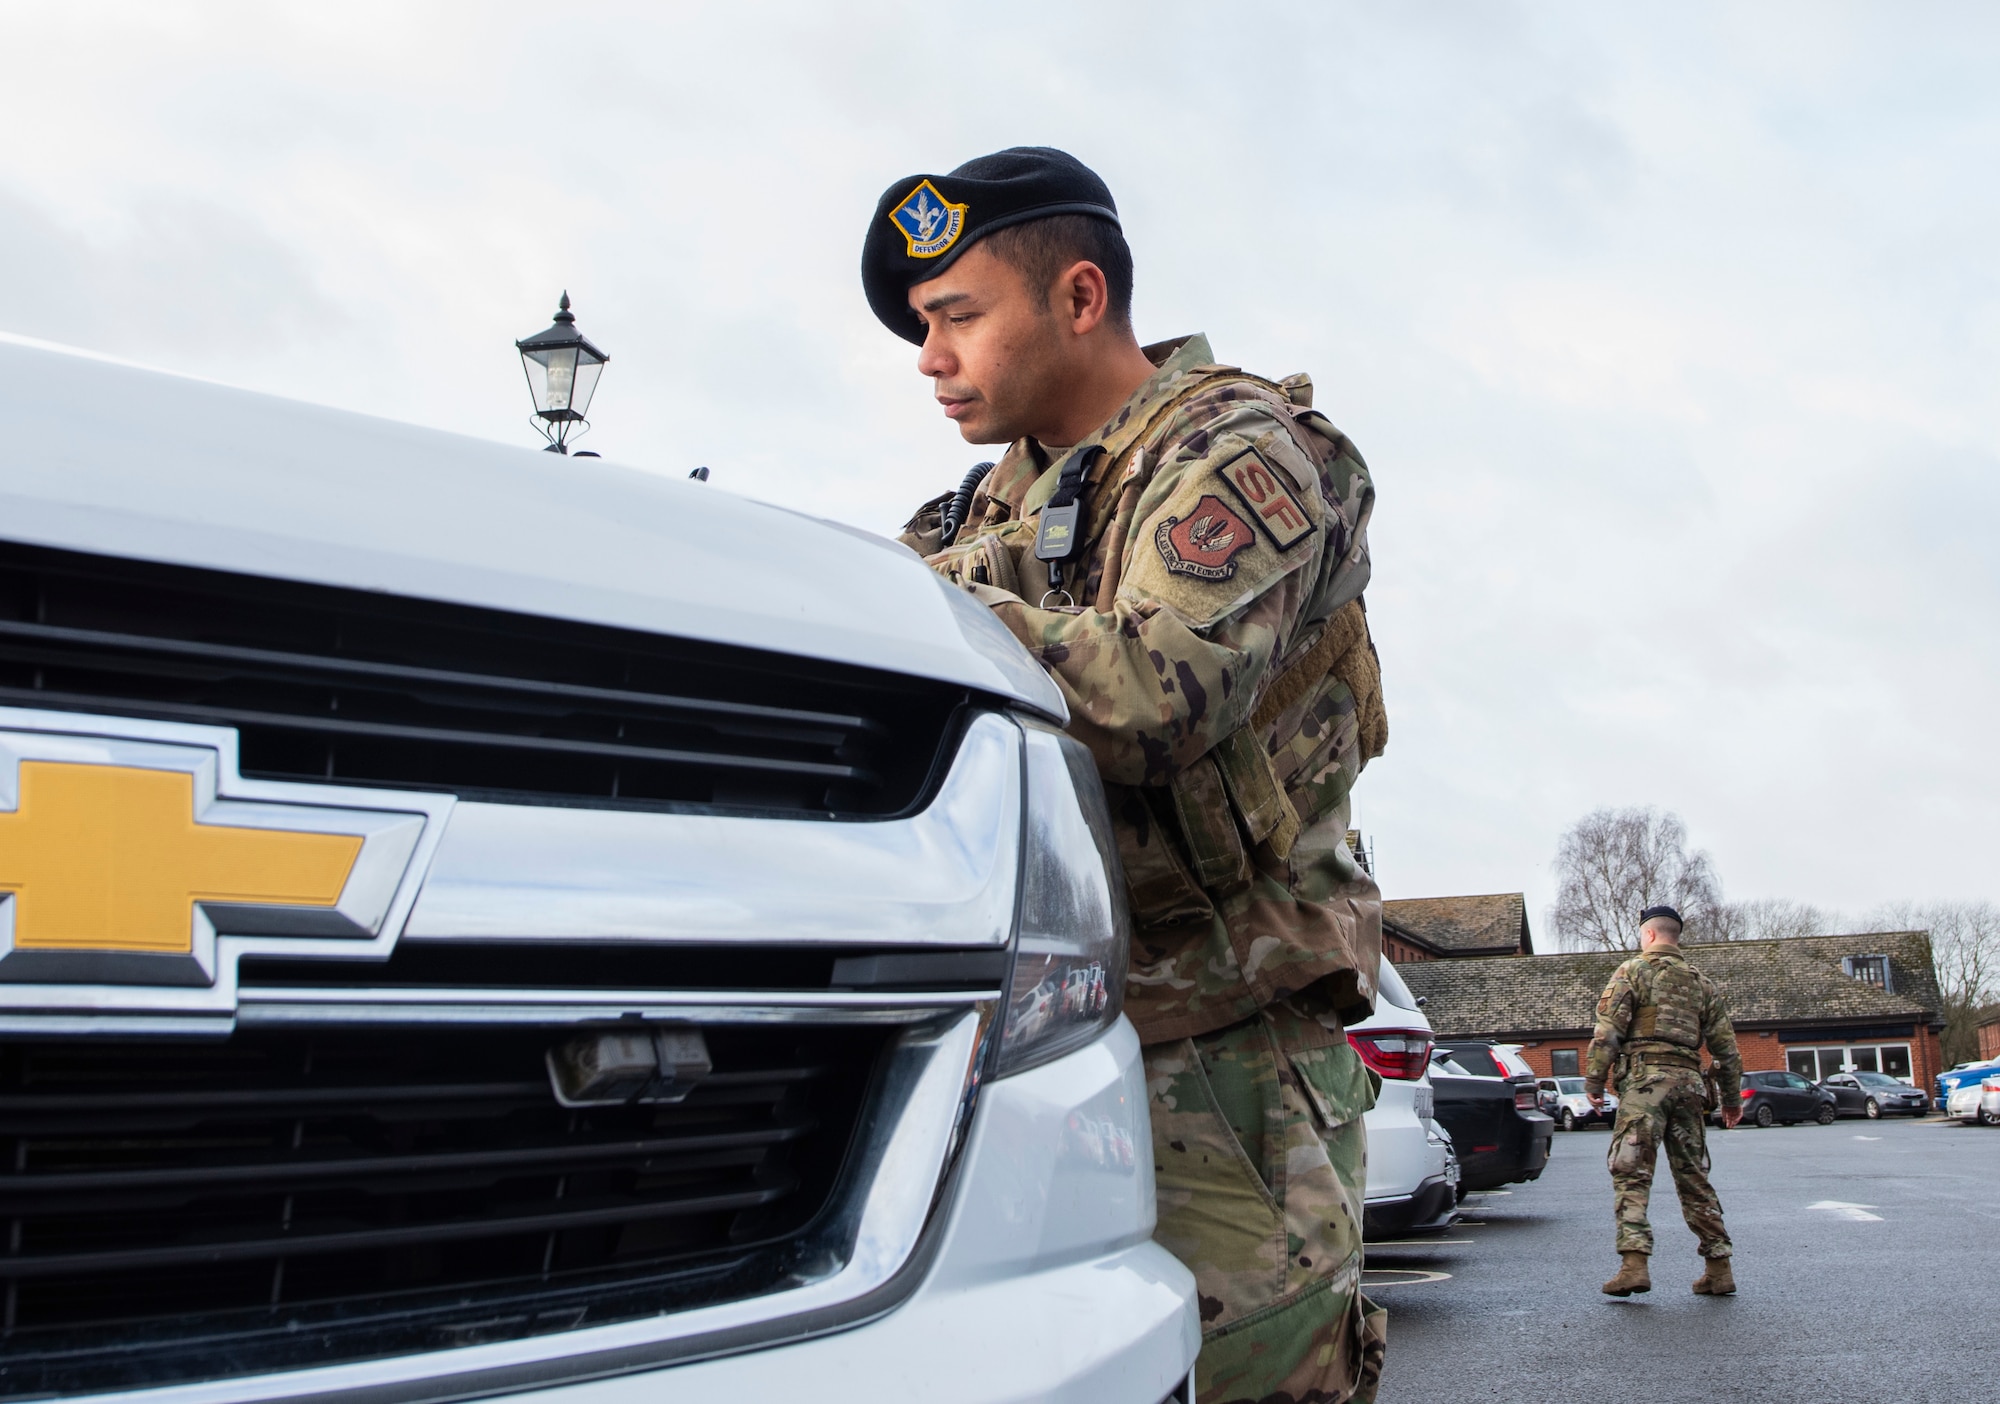 U.S. Air Force Tech. Sgt. Randy Roquid, 100th Security Forces Squadron flight sergeant, prepares parking tickets for illegally parked vehicles while Tech Sgt. Thomas Hartline, 100th SFS flight sergeant, watches for traffic on Royal Air Force Mildenhall, England, Feb. 16, 2022. By strictly enforcing the use of legal parking spaces, members of the 100th SFS ensure emergency vehicles are able get where they need to be in a moment’s notice. (U.S. Air Force photo by Senior Airman Kevin Long)